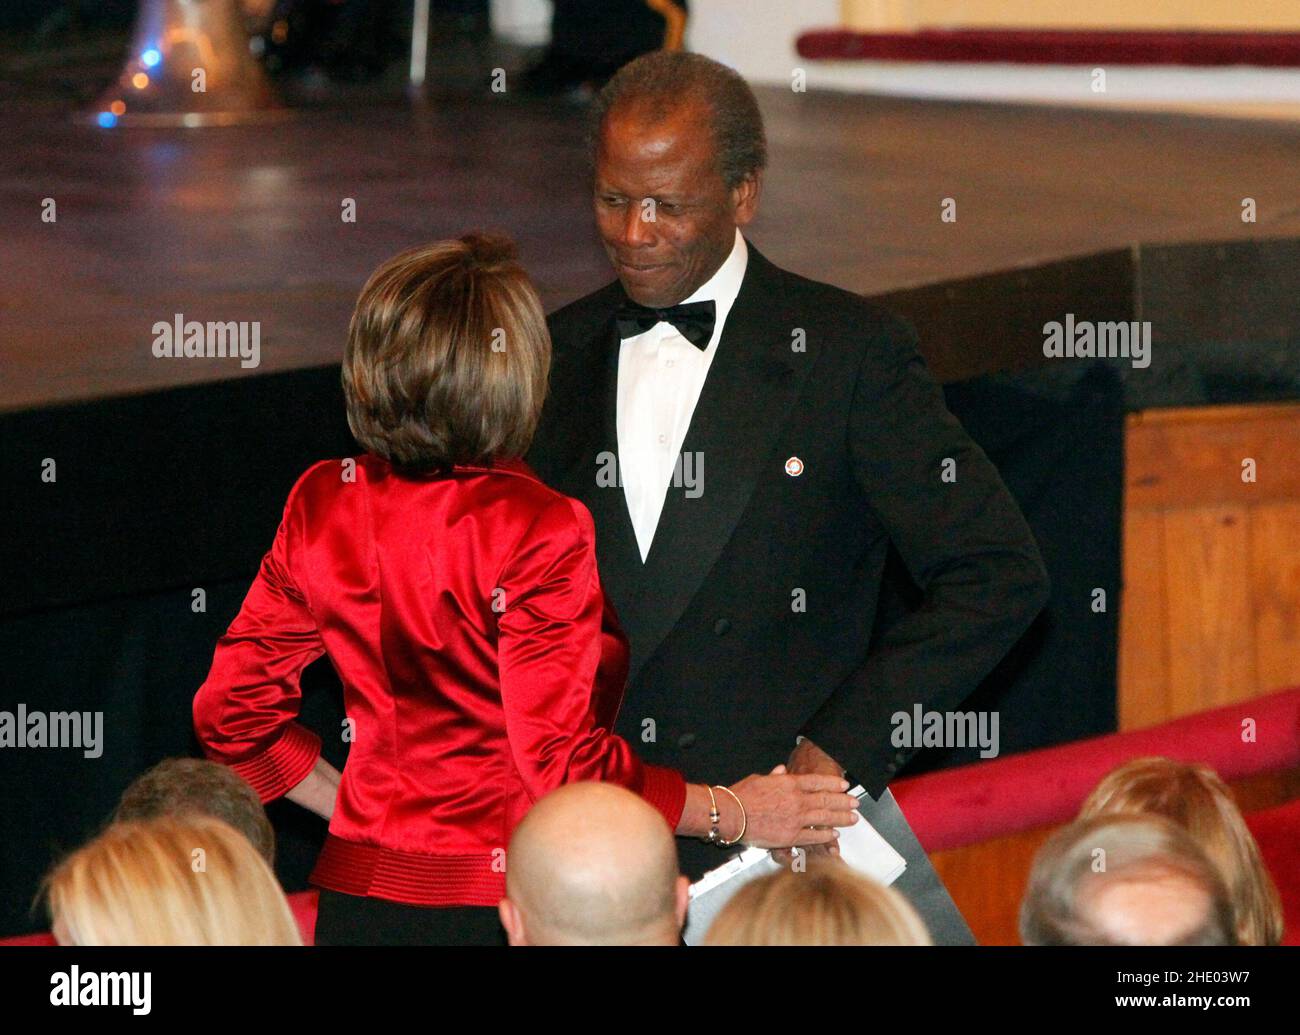 File photo - Washington, DC - February 11, 2009 -- United States Speaker of the House Nancy Pelosi (Democrat of California), greets actor Sydney Poitier at the Ford's Theater reopening celebration, Washington, DC, Wednesday, February 11, 2009. The theater underwent an 18 month renovation. - Sidney Poitier, legend and first black best actor Oscar winner, dead at 94. Photo by Aude Guerrucci - Pool via CNP /ABACAPRESS.COM Credit: Abaca Press/Alamy Live News Stock Photo